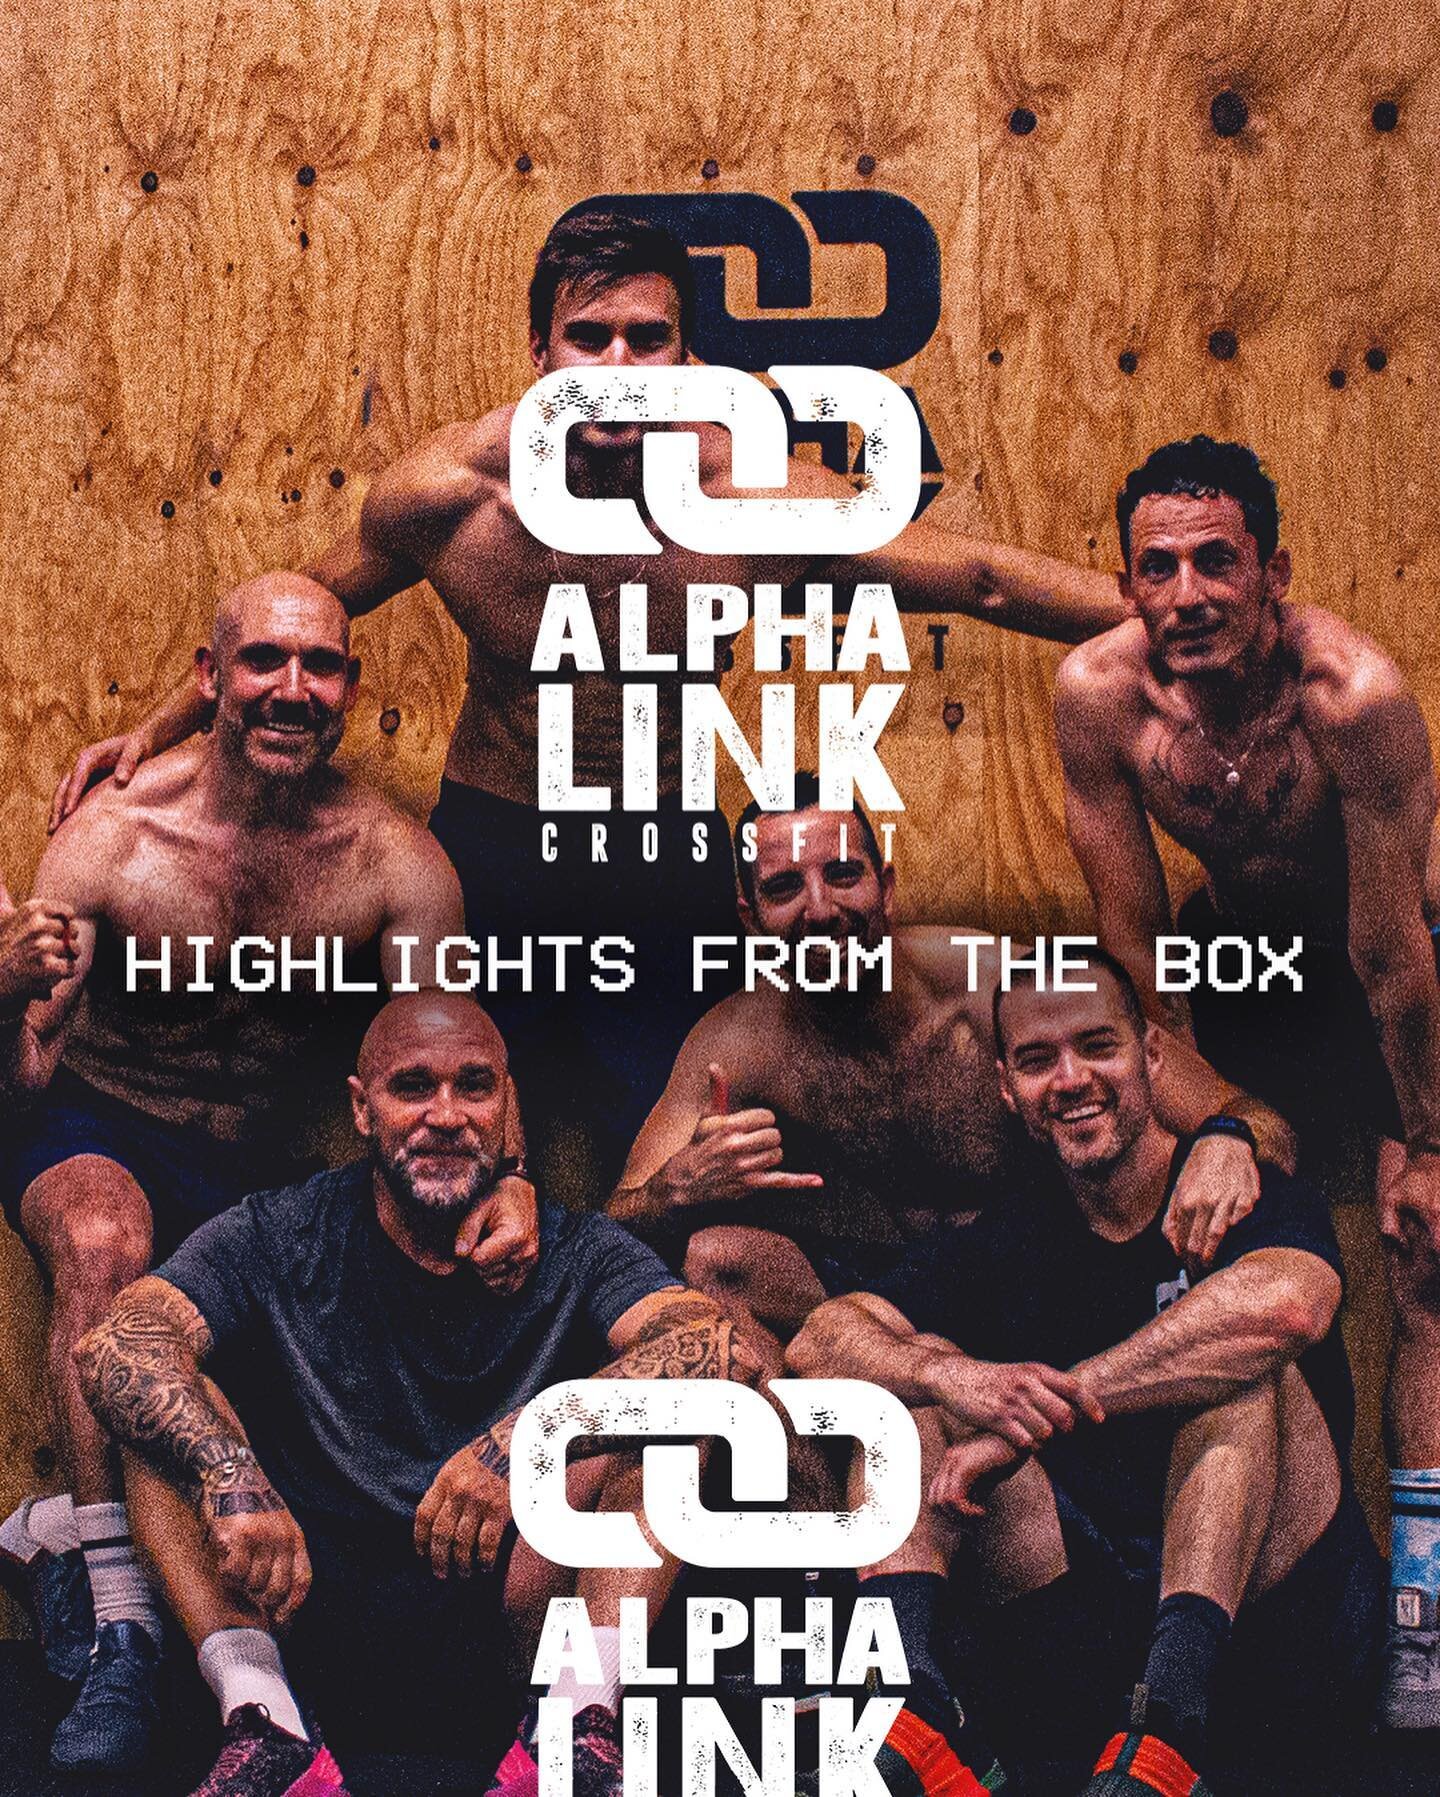 -Highlights from the Box- 

Training days @alphalinkcrossfit 

Comentad si no est&aacute;is etiquetand@

📸 @_george_holland 

#alphalinkcrossfit #workout #highlights #sweatandglory #highlightsoftheweek